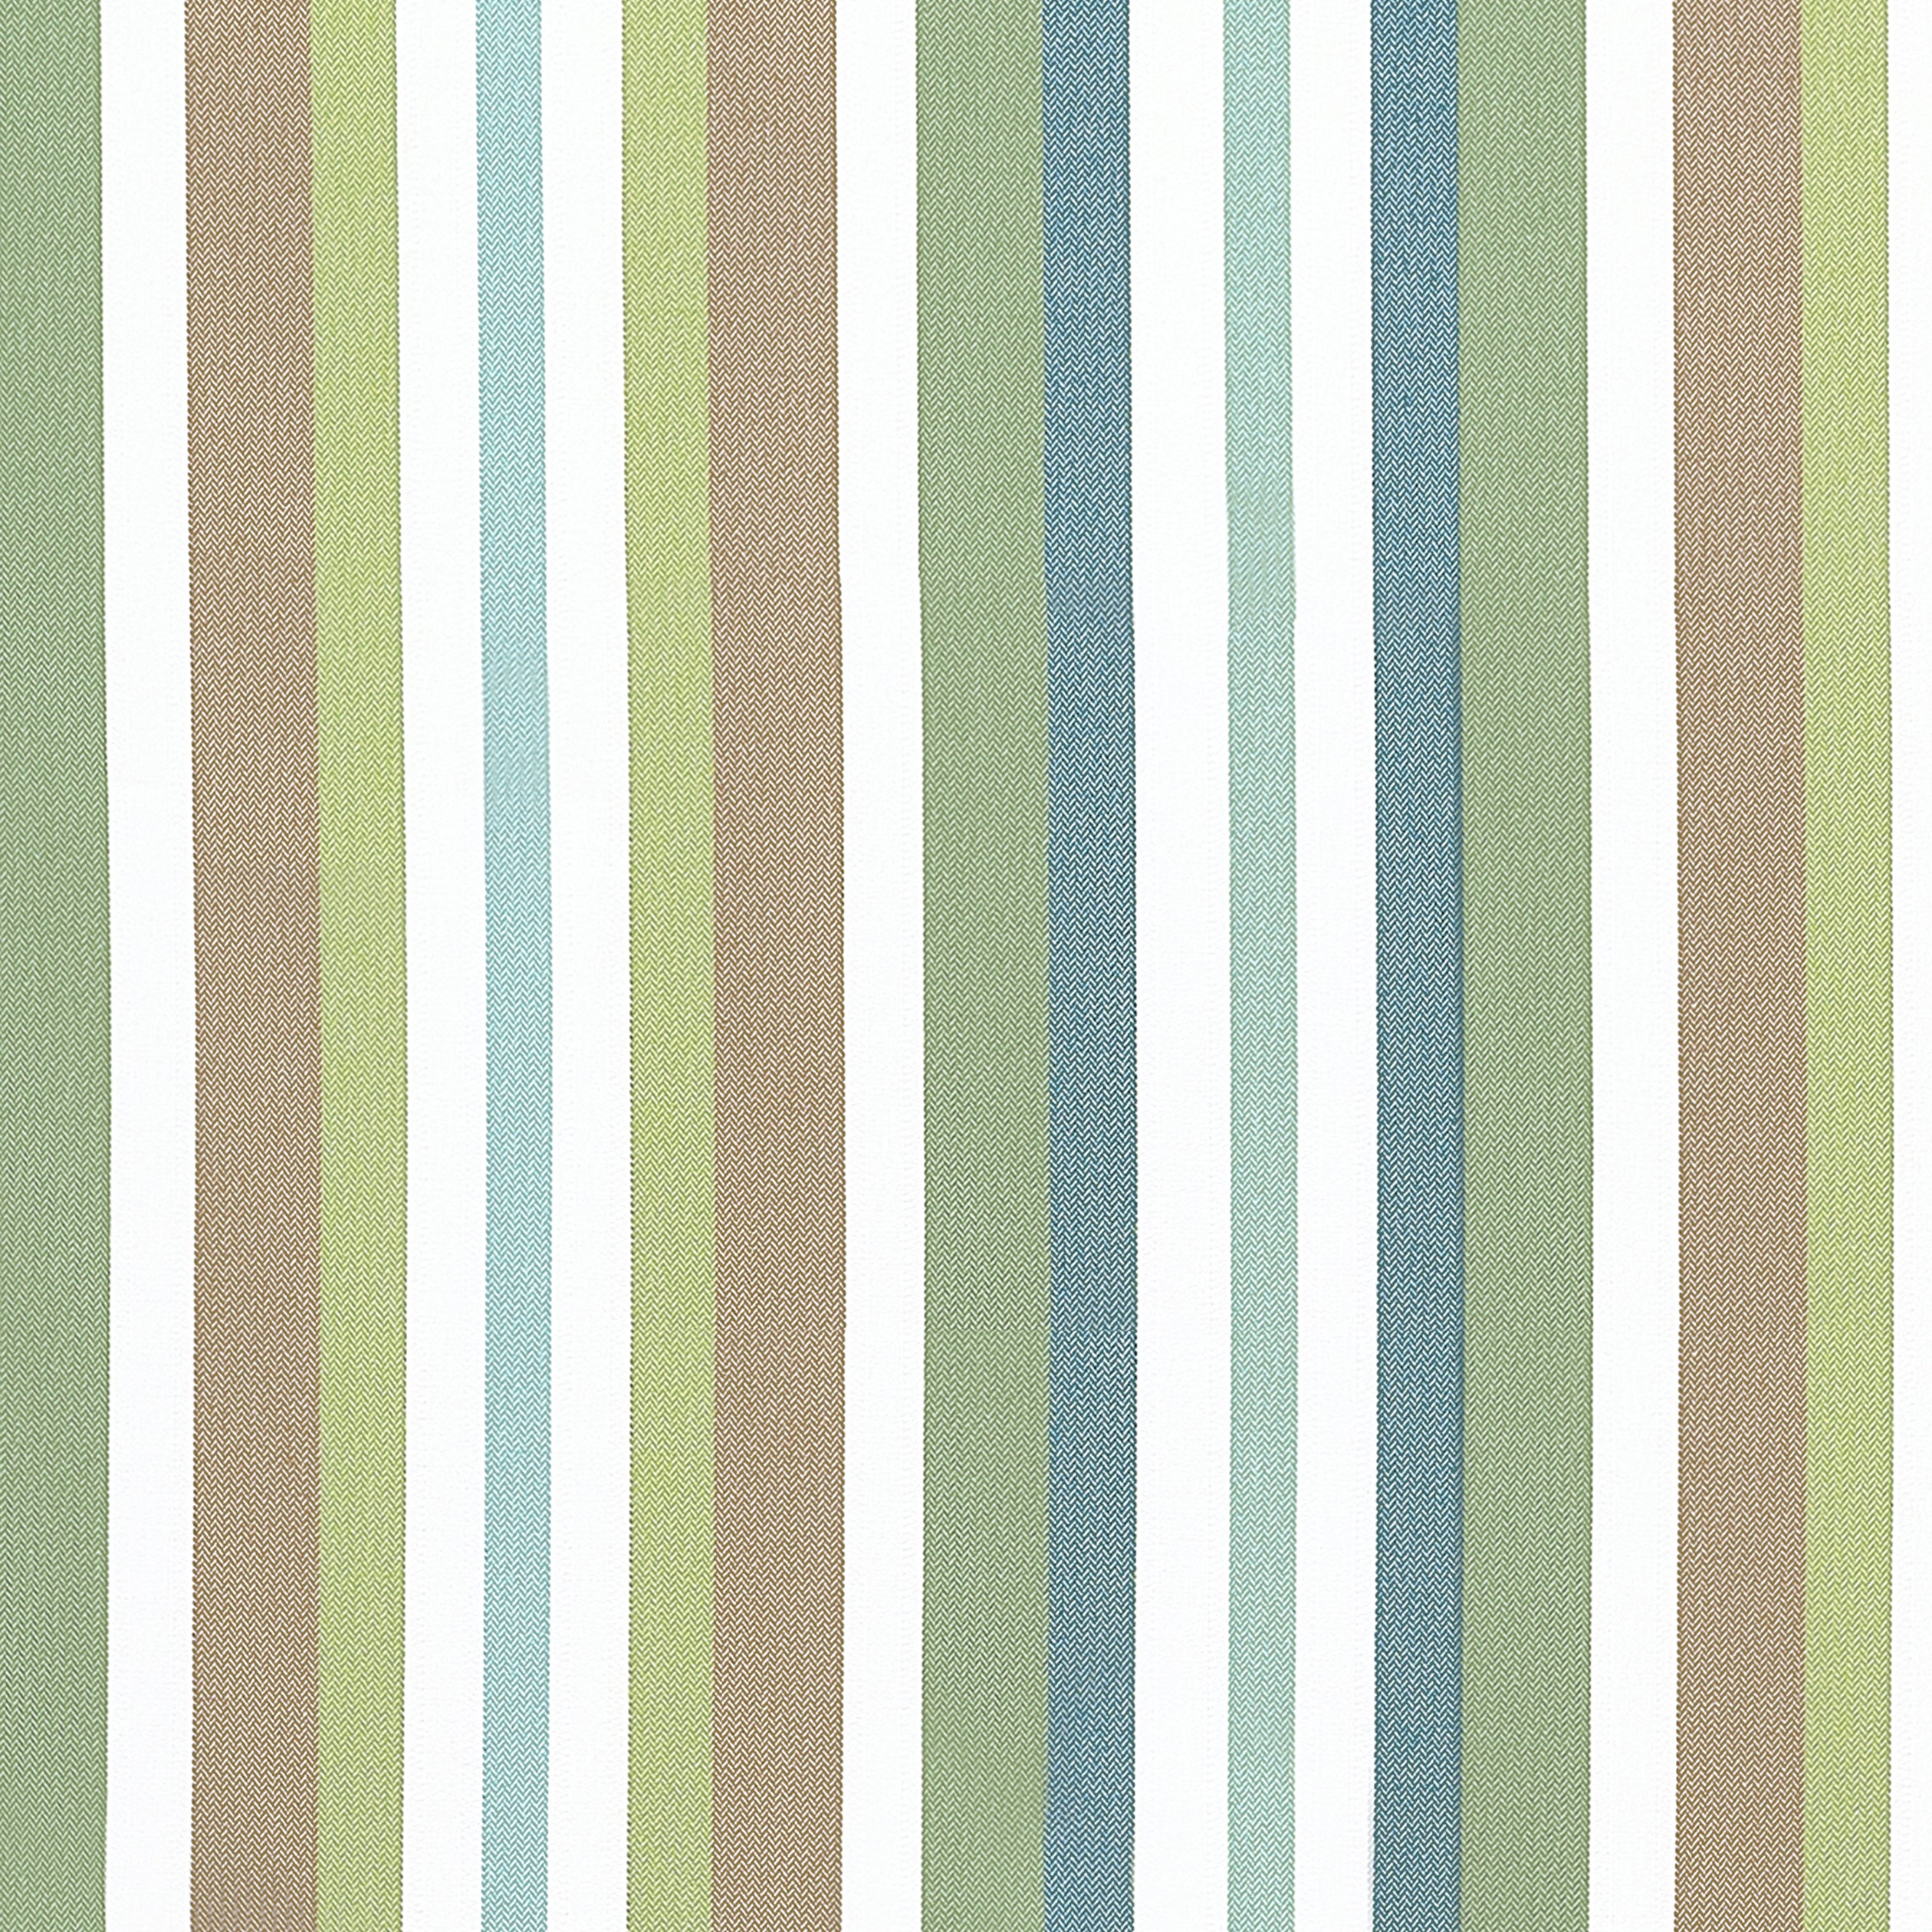 Kalea Stripe fabric in lagoon color - pattern number W81669 - by Thibaut in the Locale collection